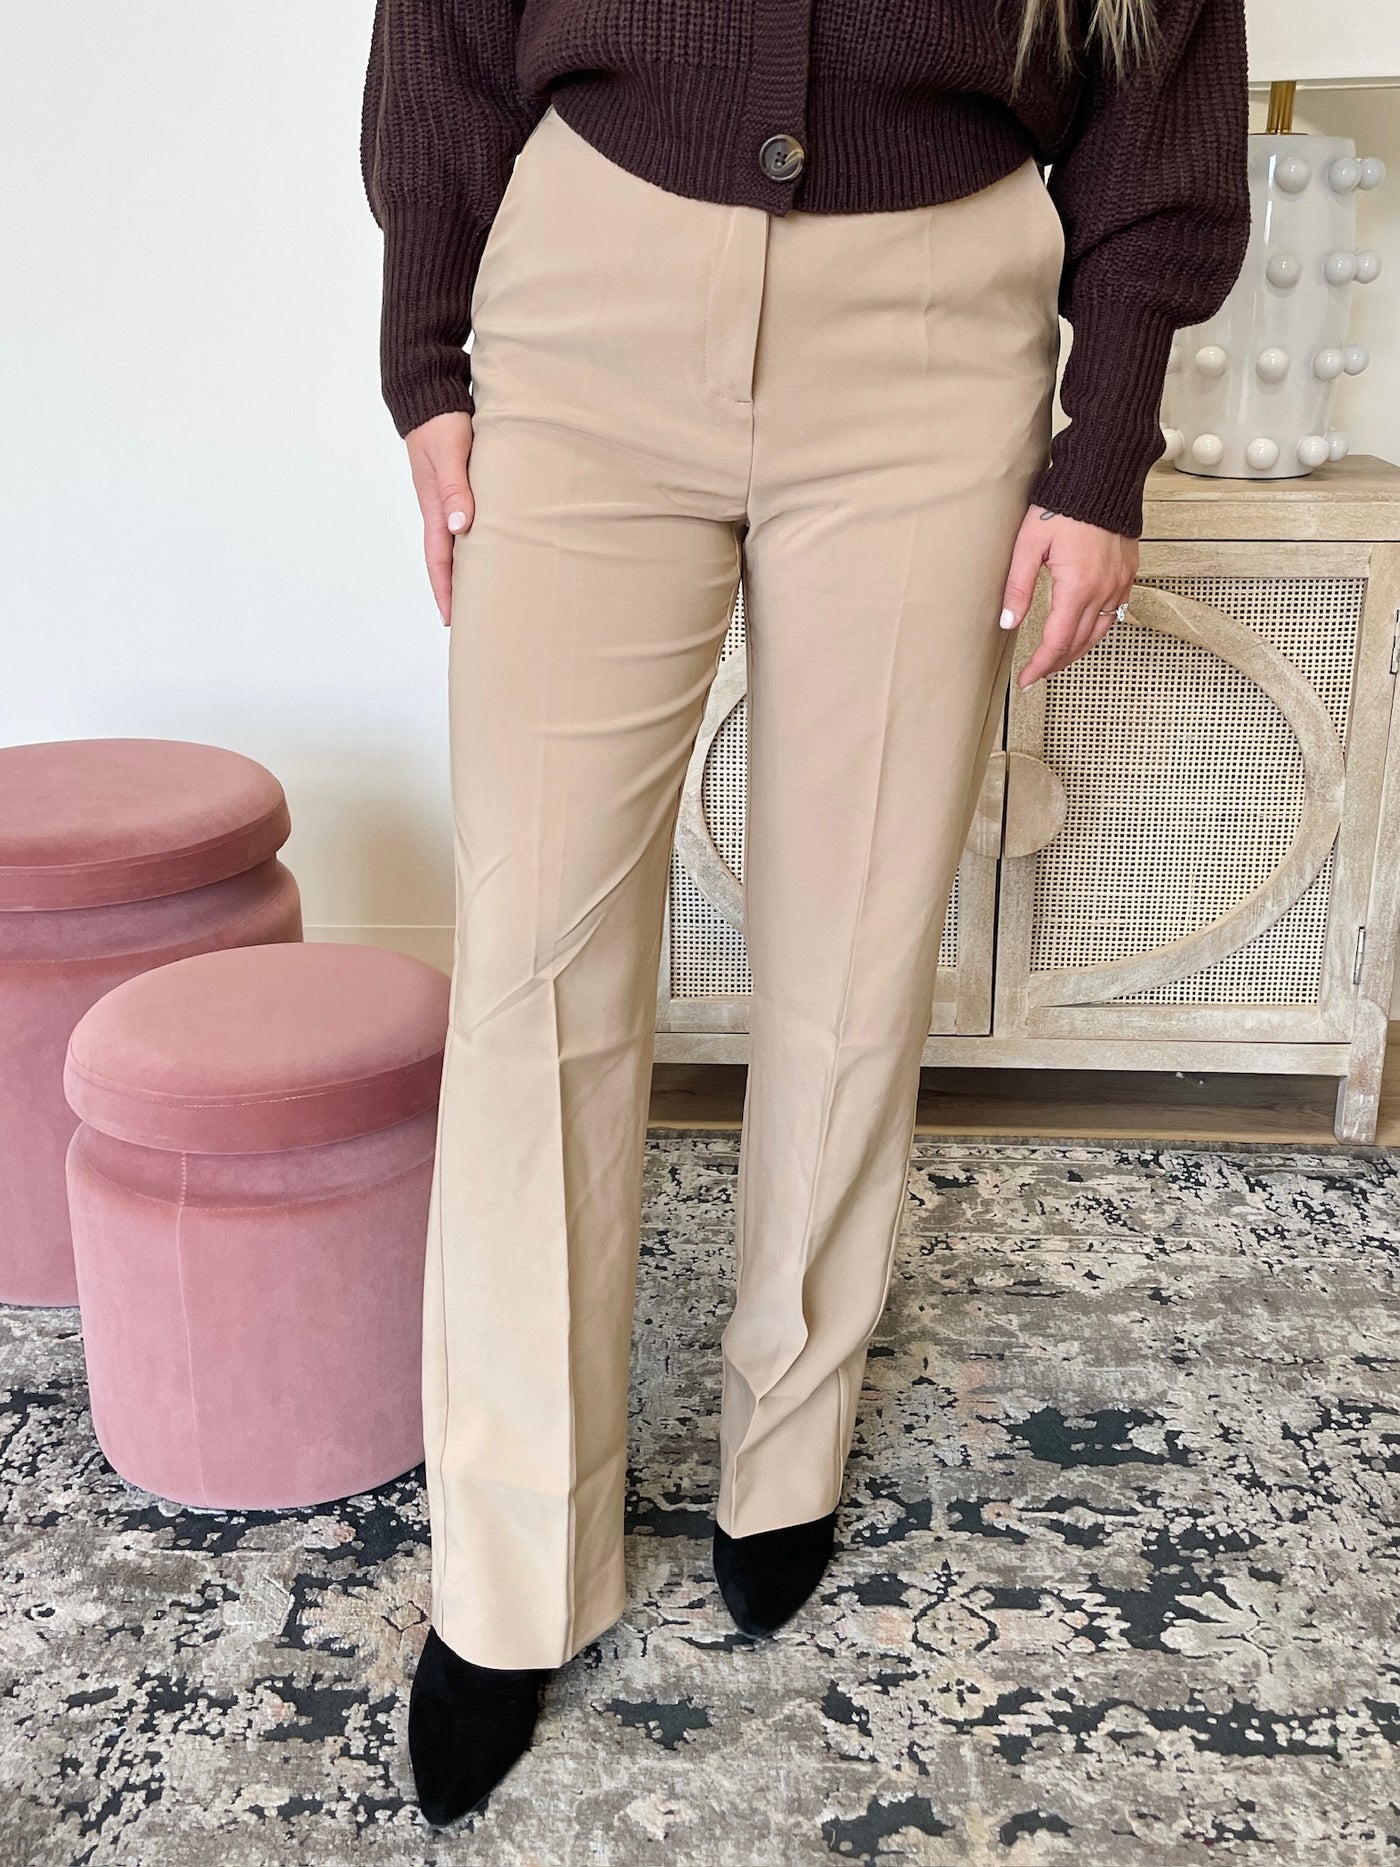 THE FORMAL STRAIGHT LEG WORK PANT IN CAMEL